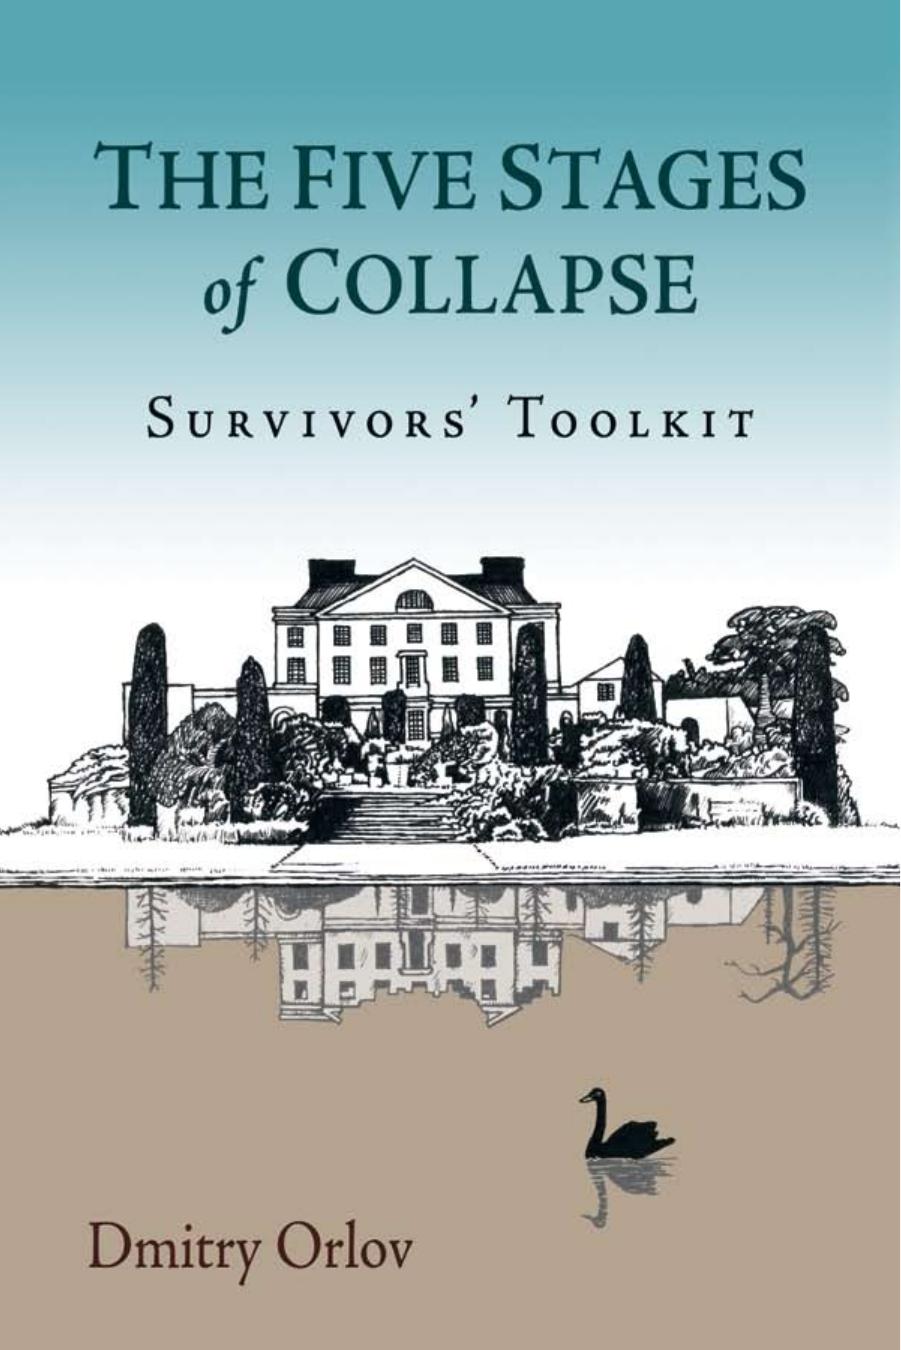 The Five Stages of Collapse: Survivors' Toolkit